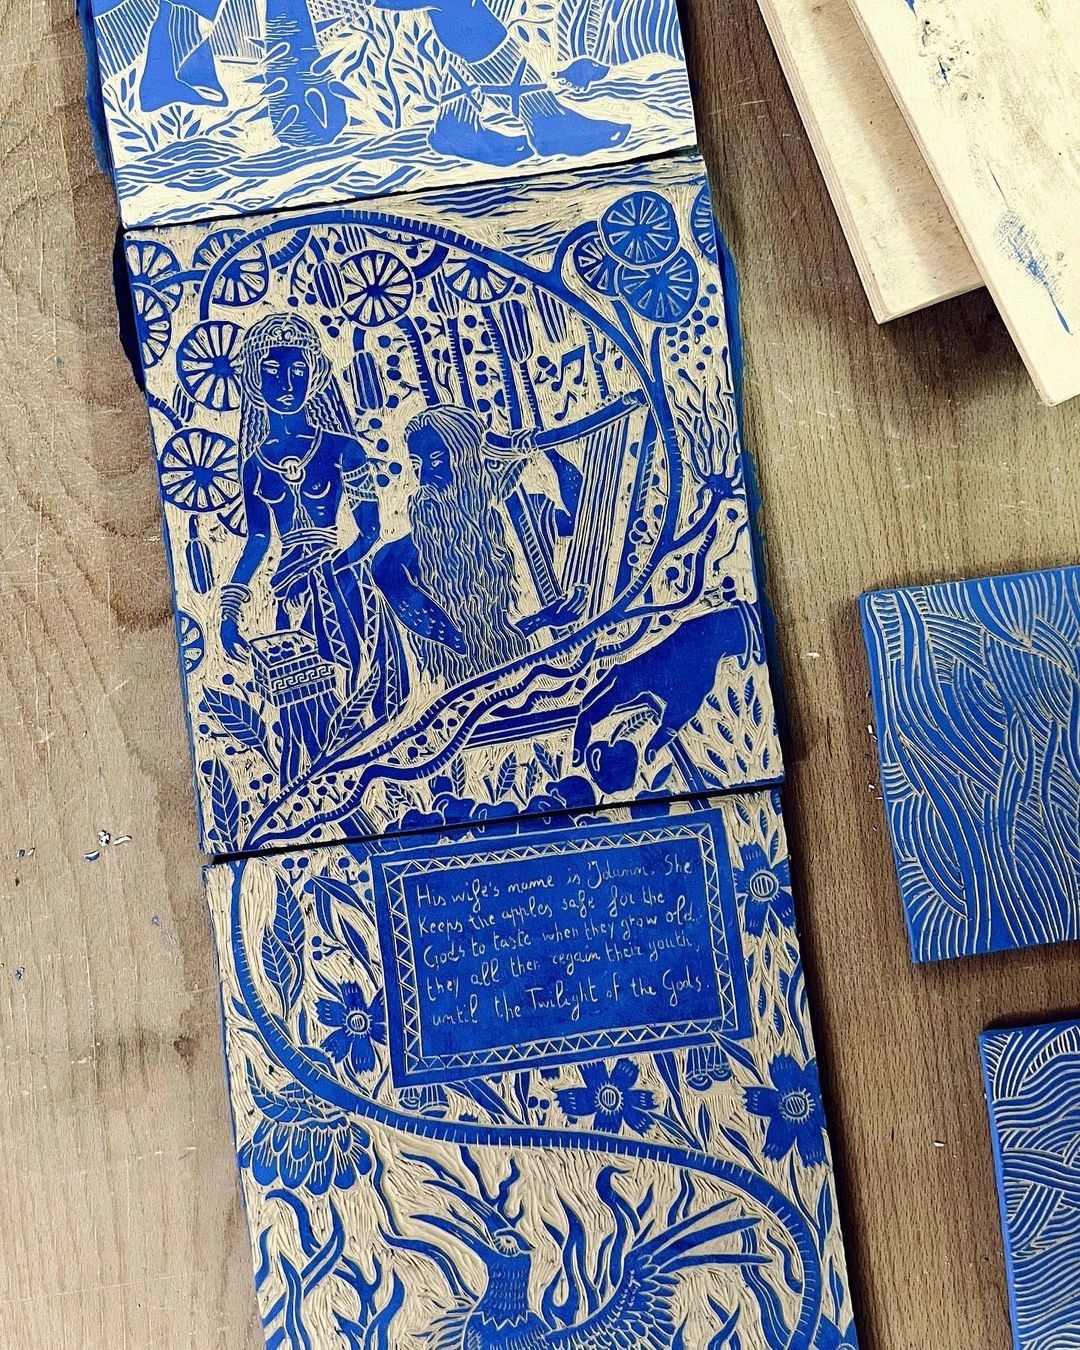 Illustred Ceramic Vessels And Tiles By Clara Holt 18